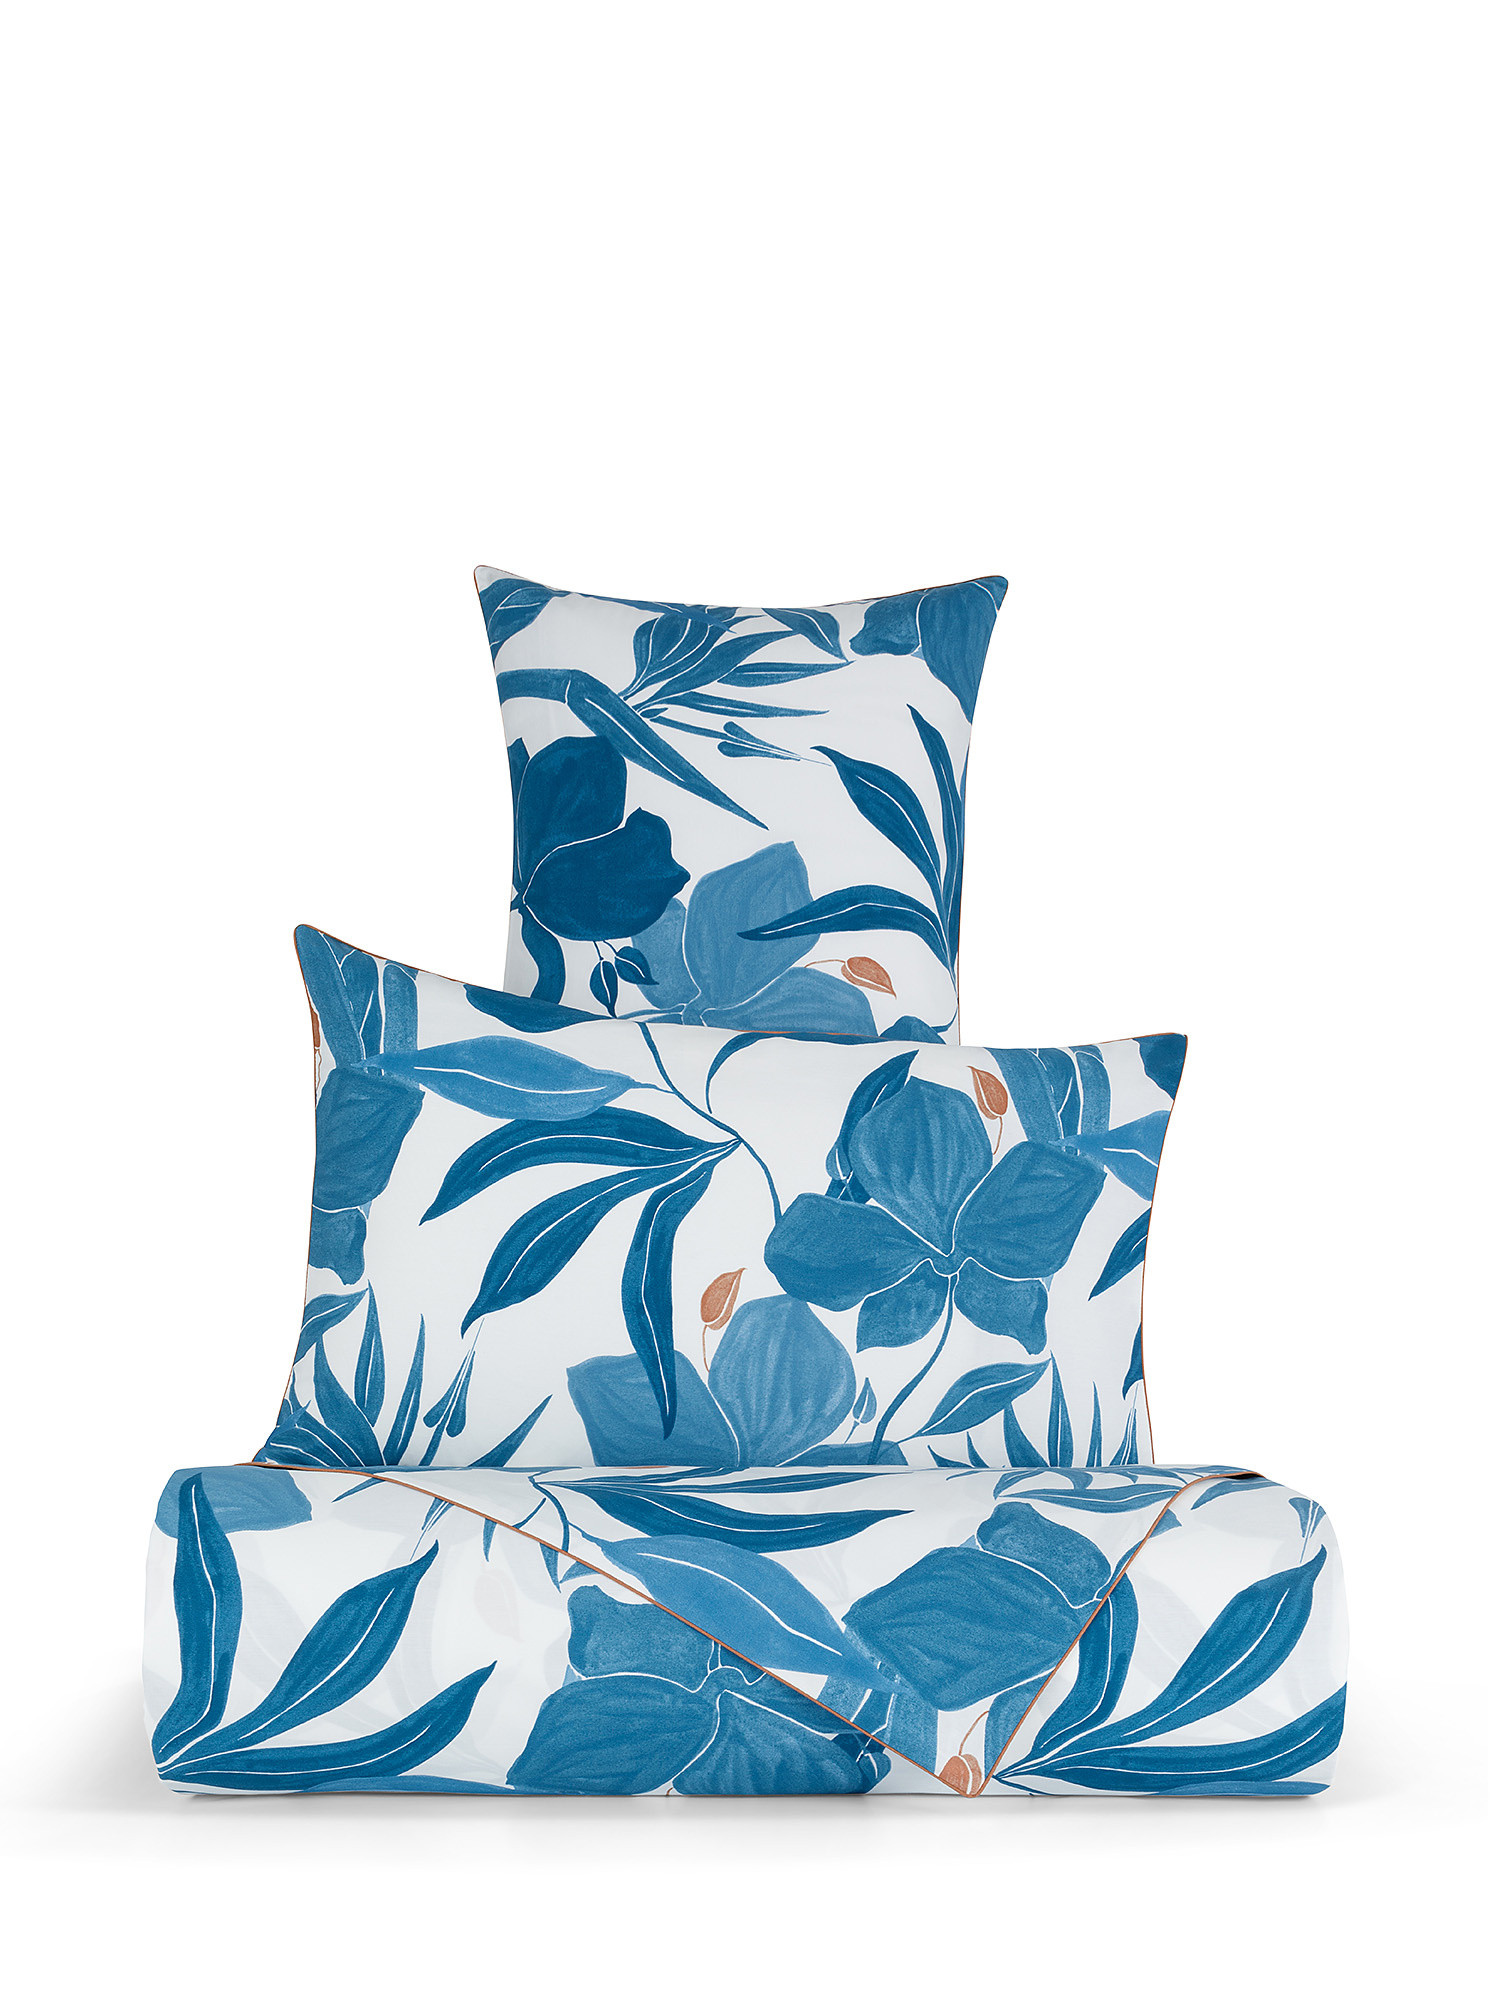 Floral patterned cotton percale duvet cover, Blue, large image number 0